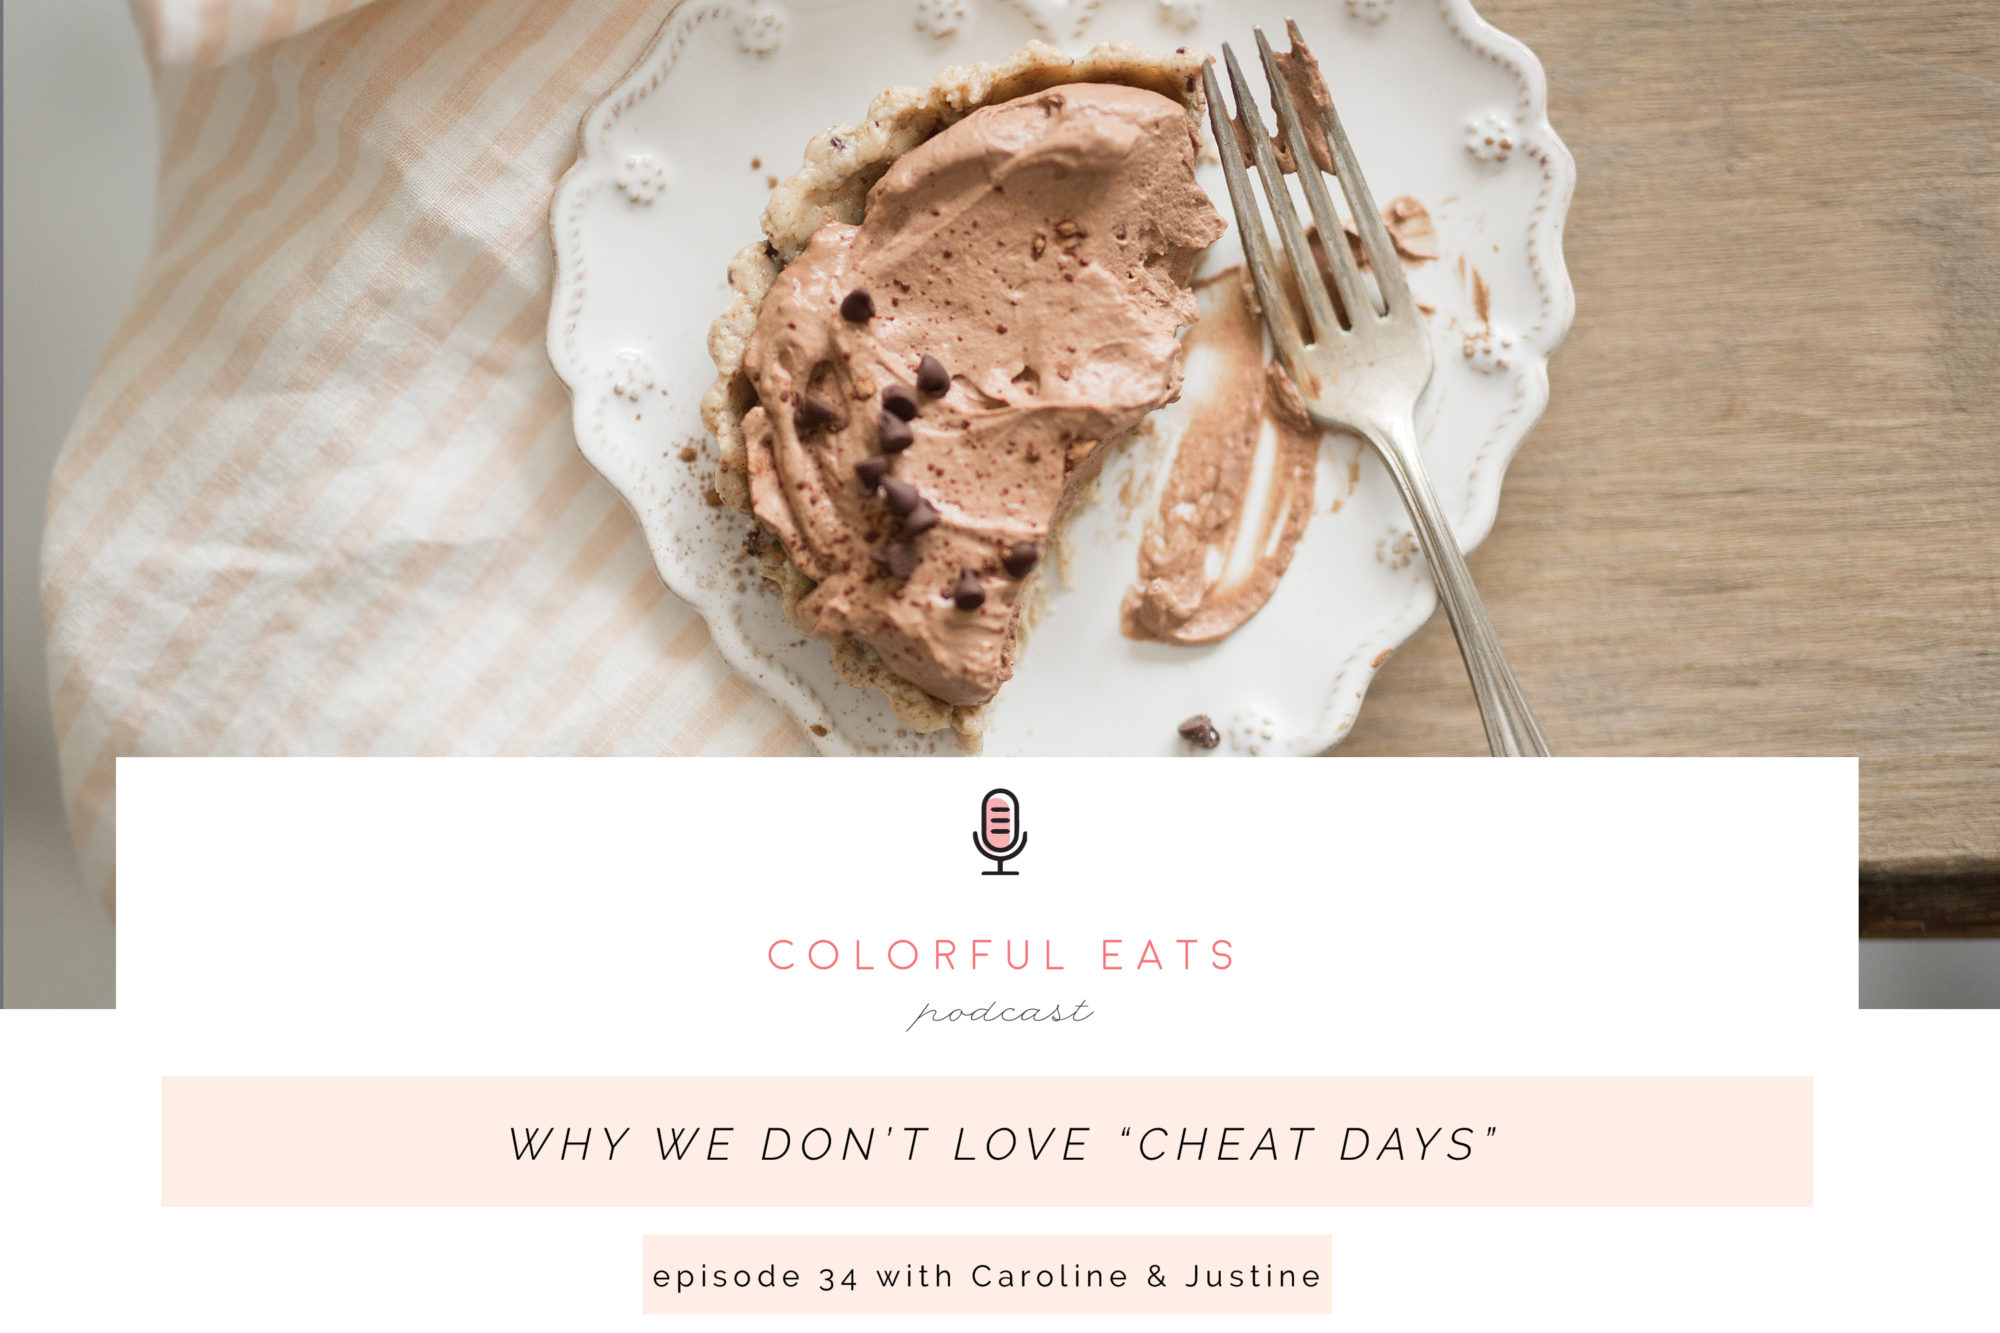 Colorful Eats Podcast Episode 34: Why We Don't Love "Cheat Days"